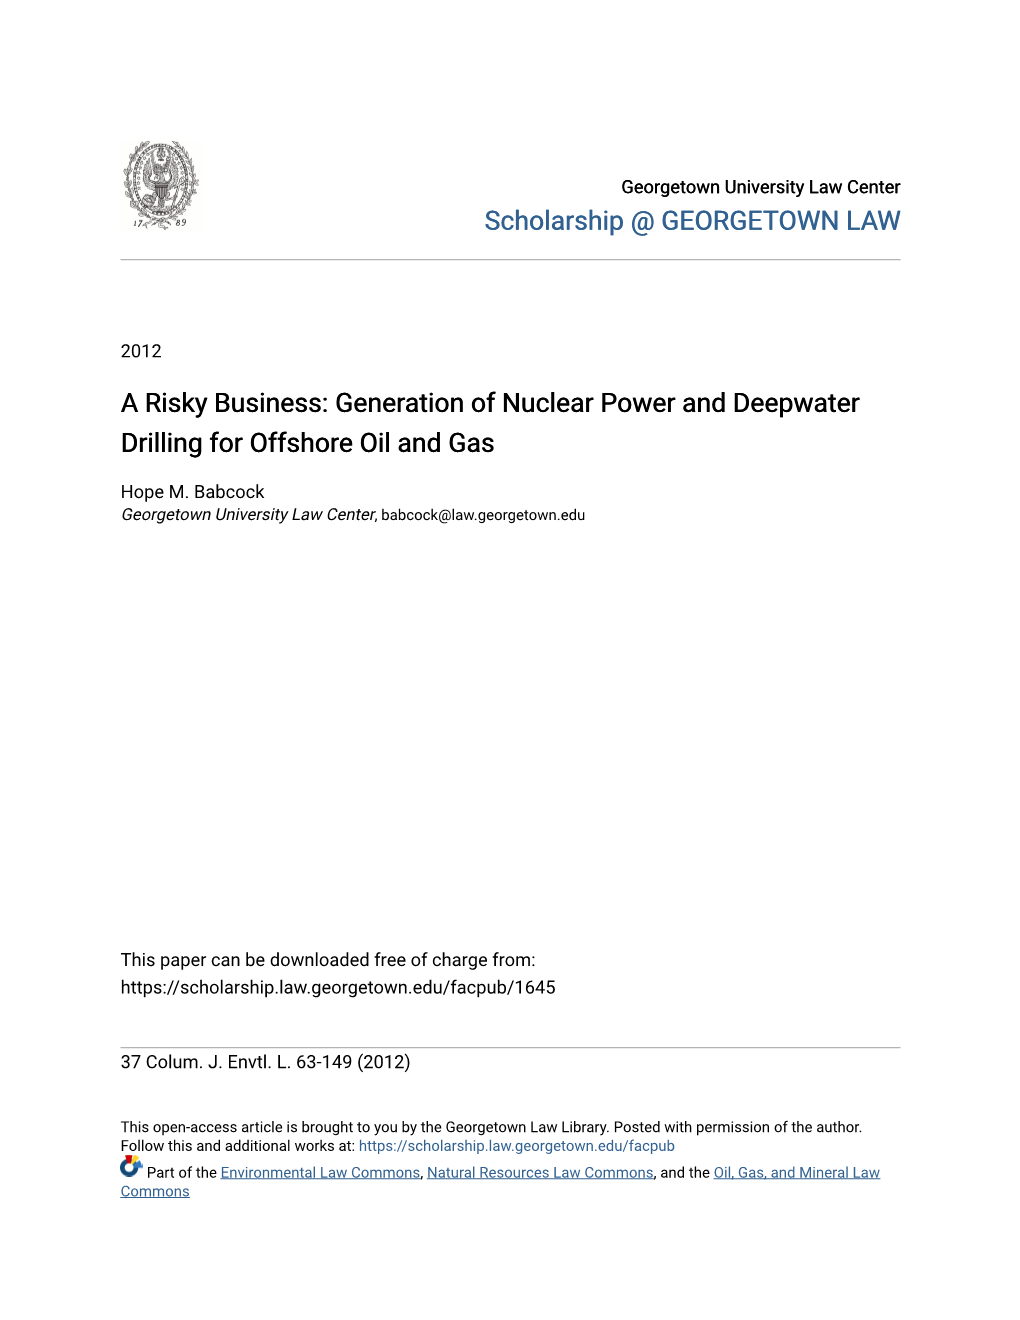 Generation of Nuclear Power and Deepwater Drilling for Offshore Oil and Gas